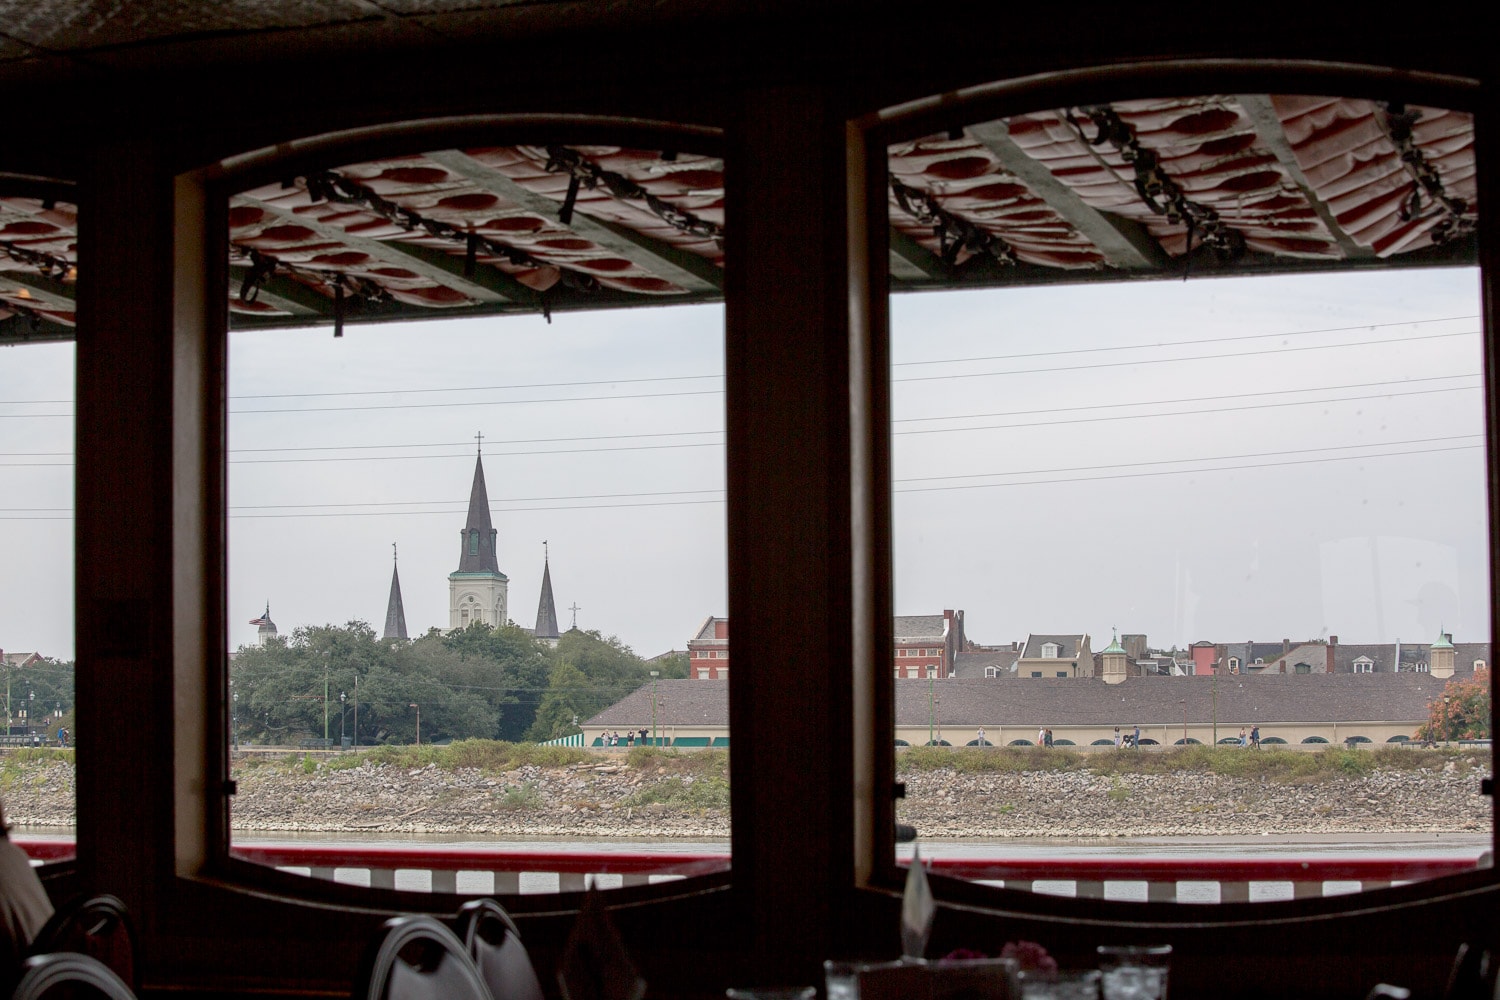 Jackson Square seen from the steamboat Natchez, on the Missisippi River